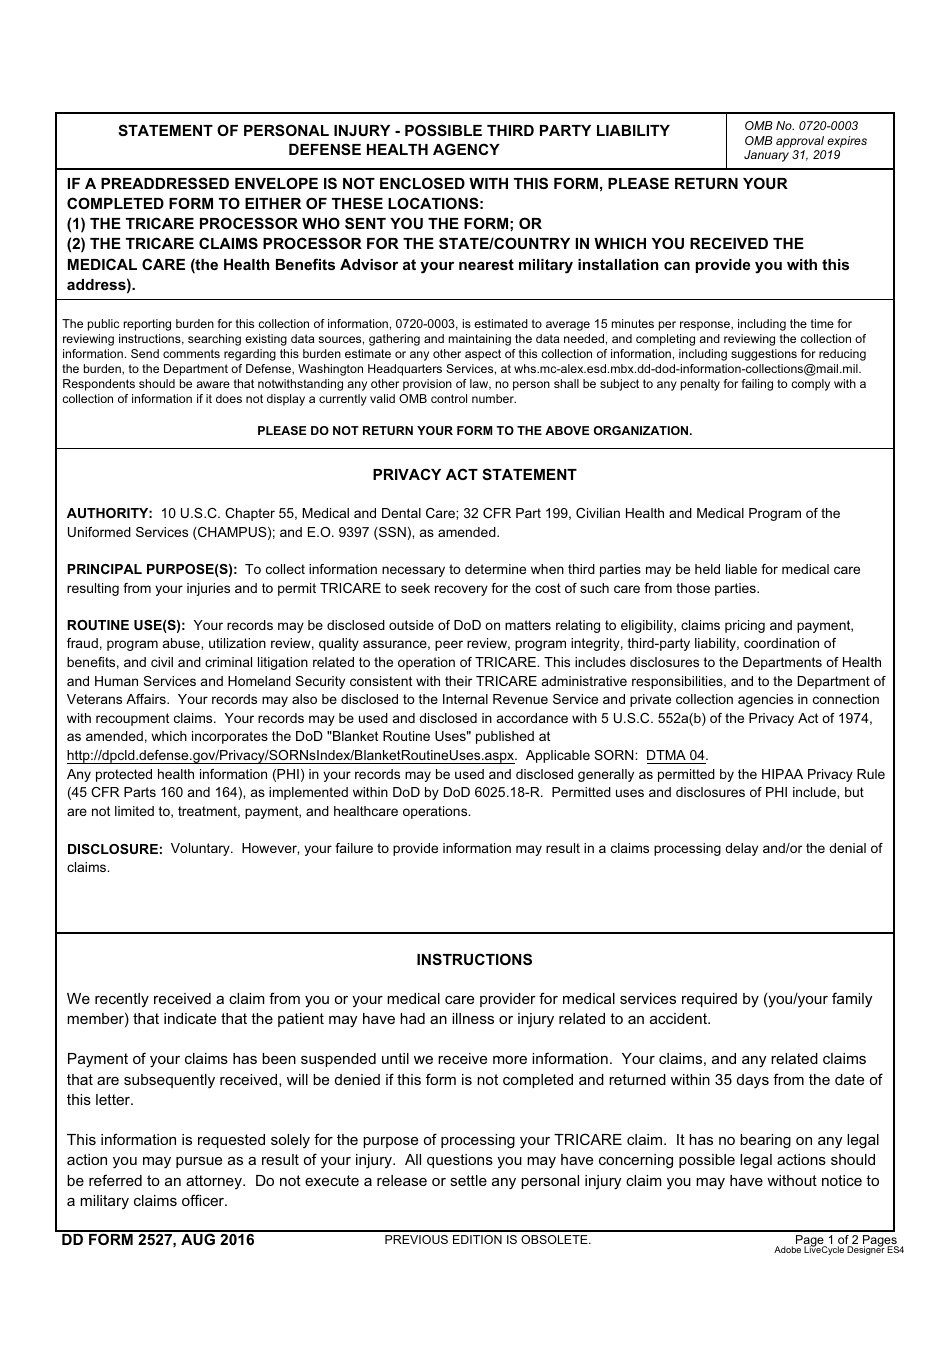 DD Form 2527 Statement of Personal Injury - Possible Third Party Liability, Defense Health Agency, Page 1